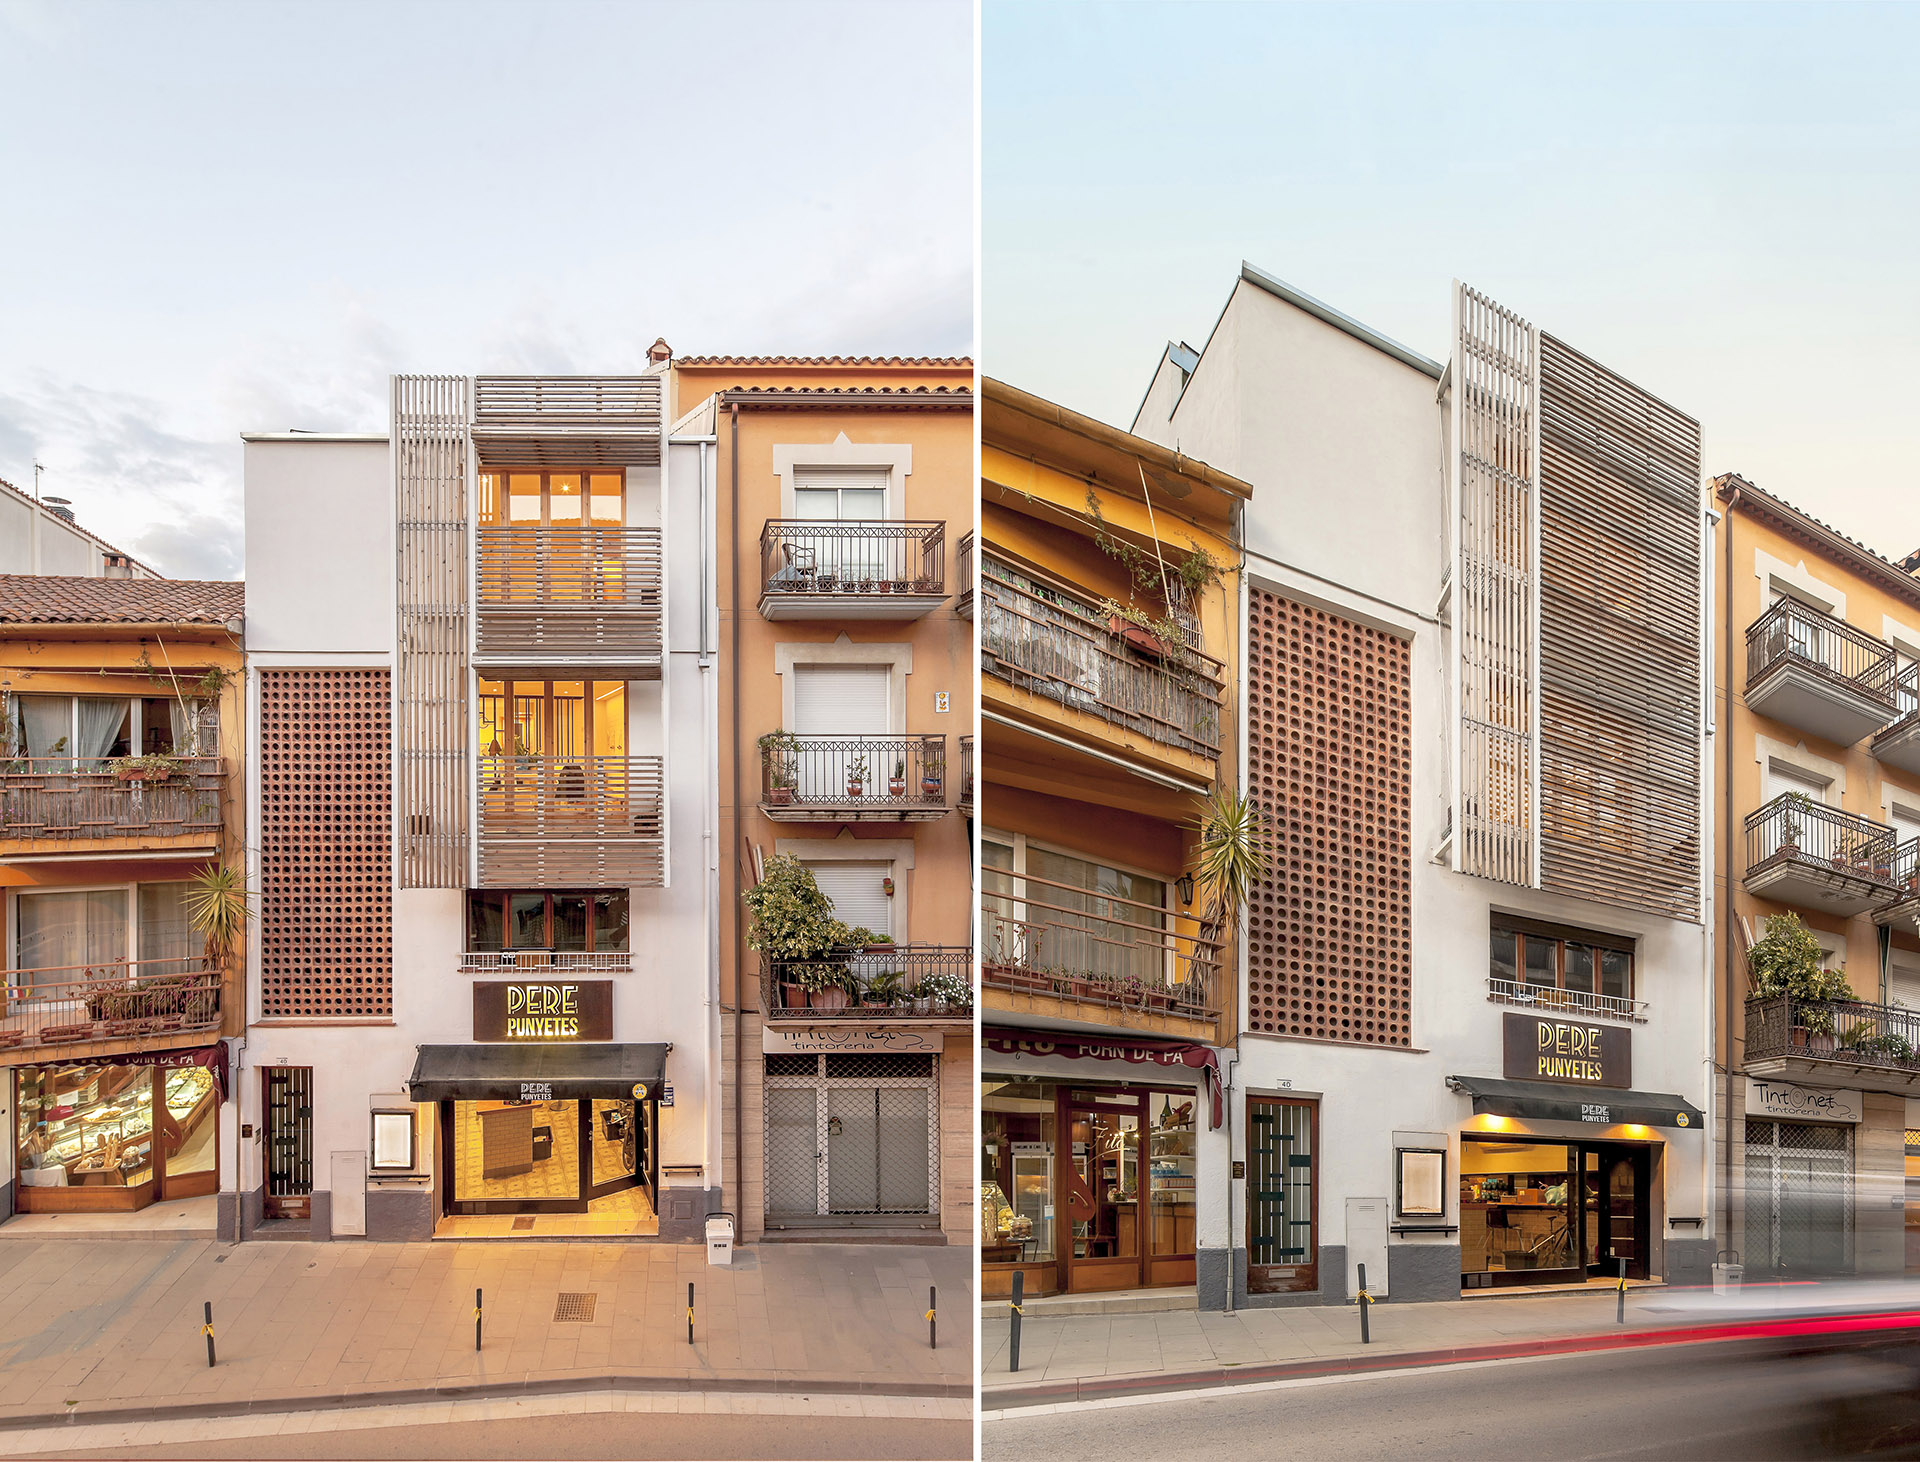 Renovation of a building in Catalonia. Wooden staves reinterpret the facade